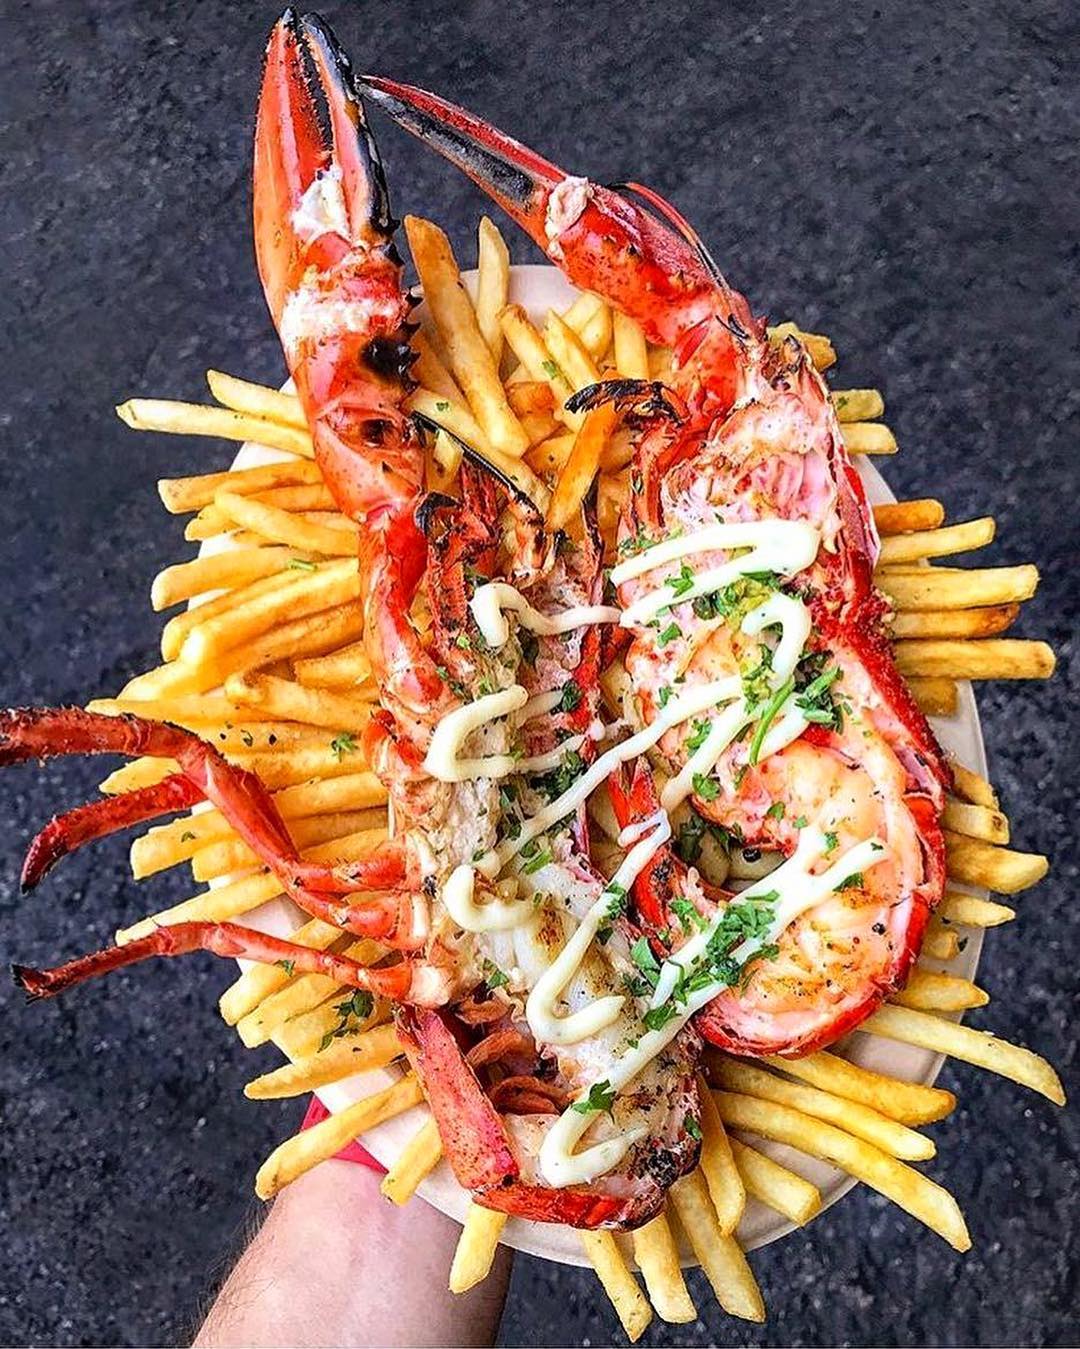 Large plate of fries topped with lobster tails Photo by Instagram user @smorgasburg